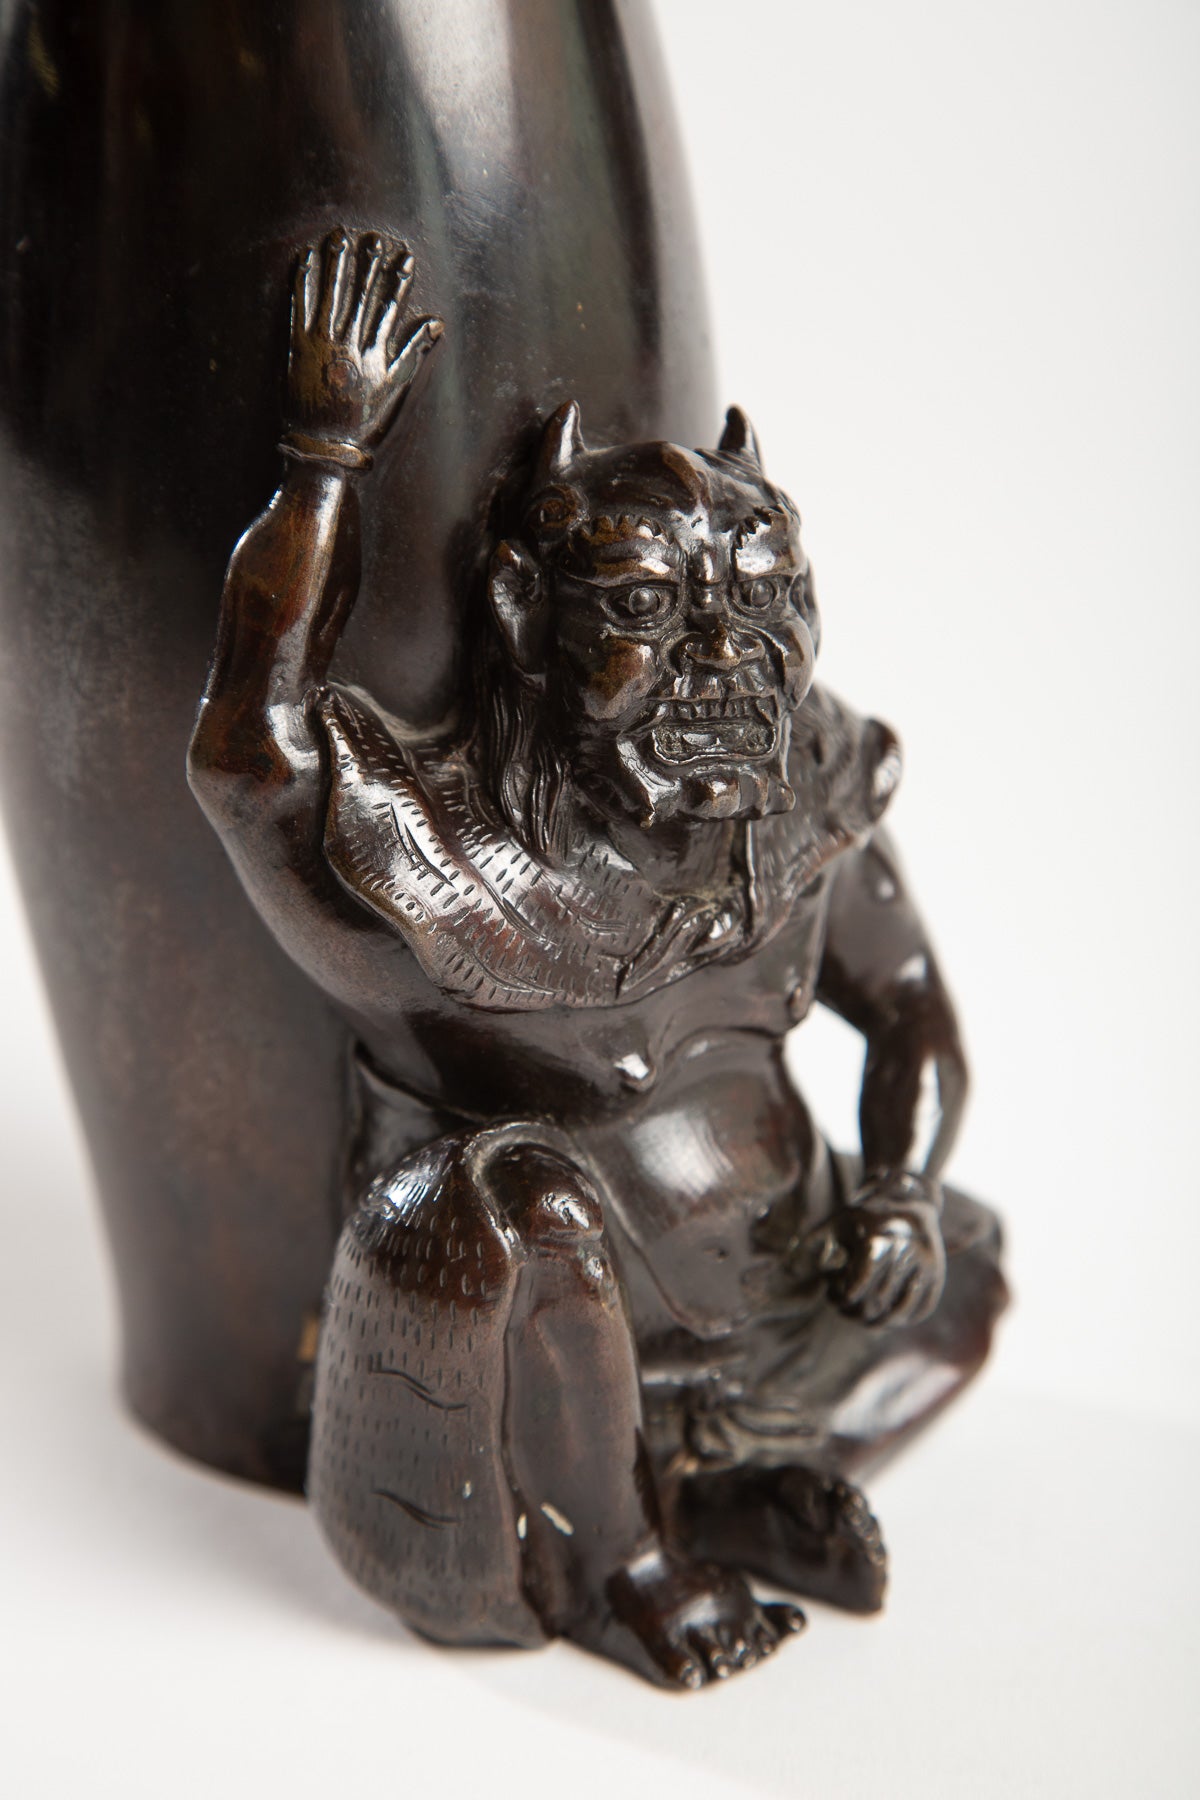 MAXFIELD PRIVATE COLLECTION | JAPANESE ONI VASE